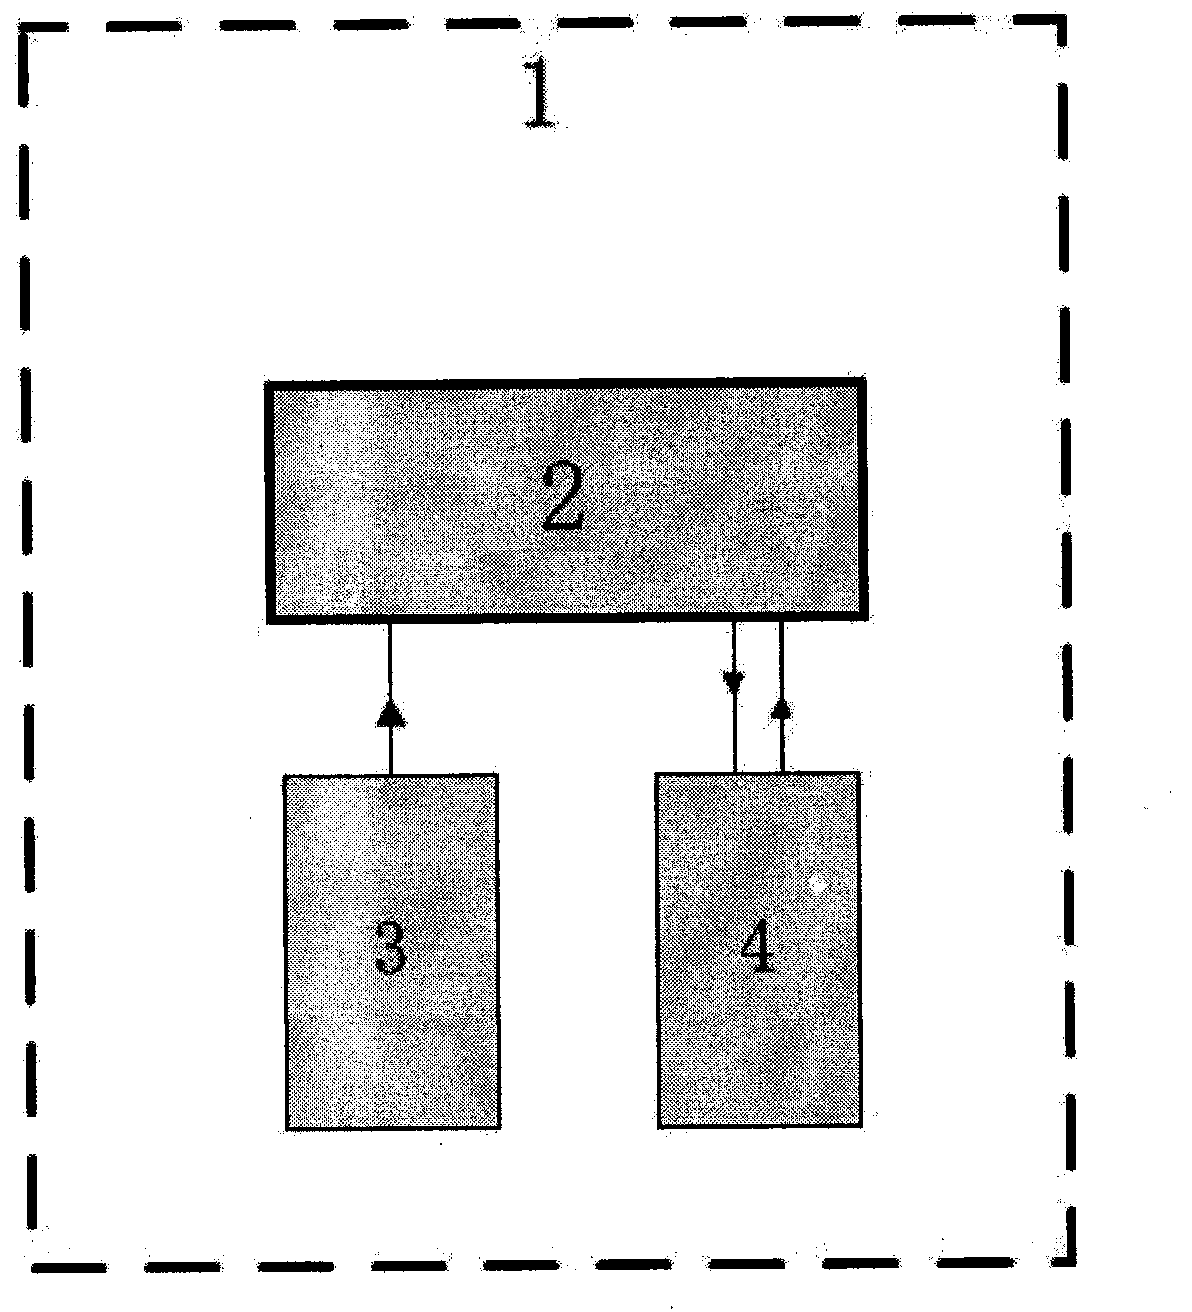 Method for detecting initial posture and motion states of weather detecting sonde based on three-dimensional acceleration sensor